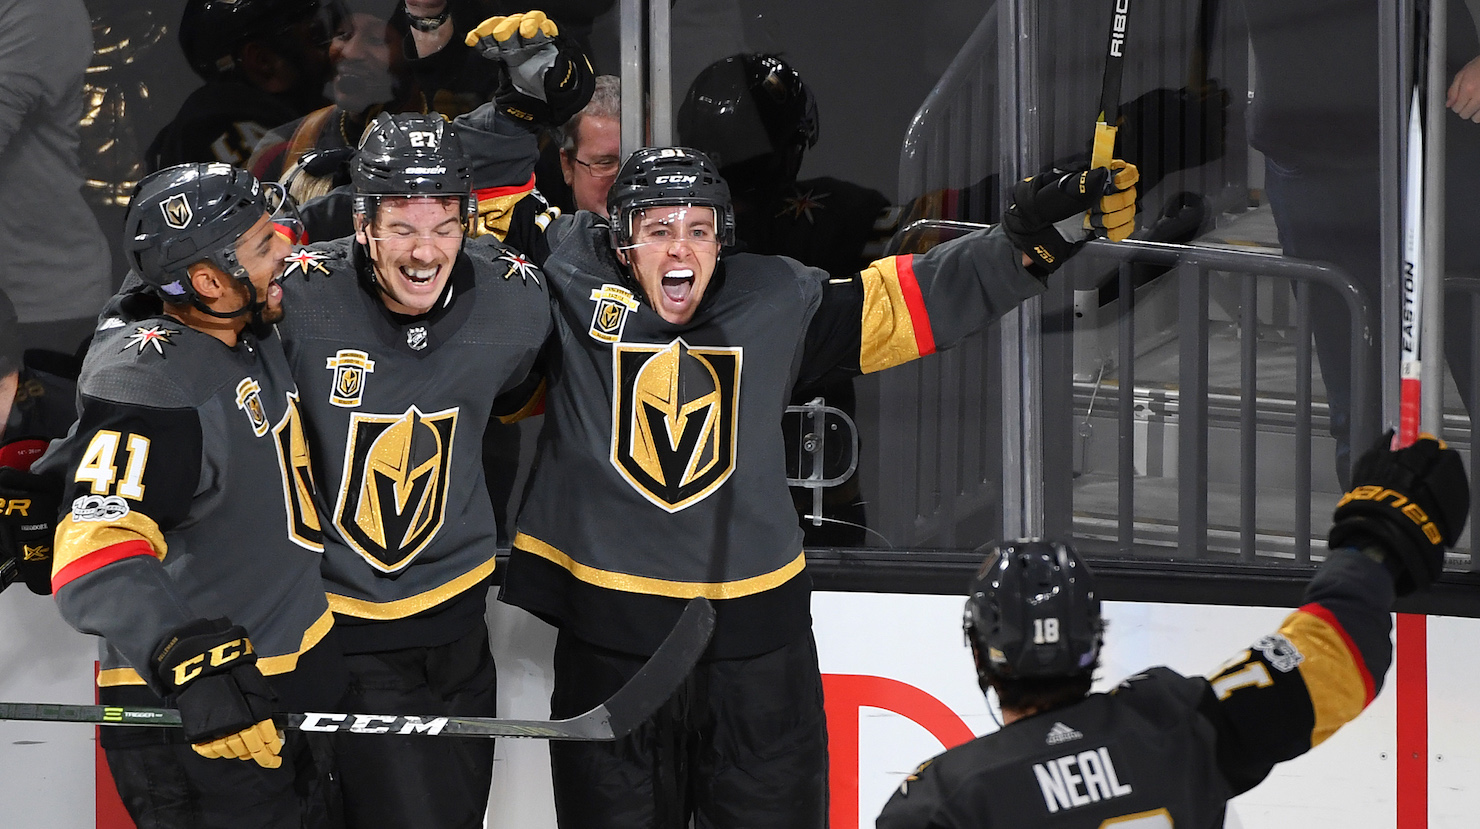 Biscuits 37: Are the Golden Knights Actually Good?